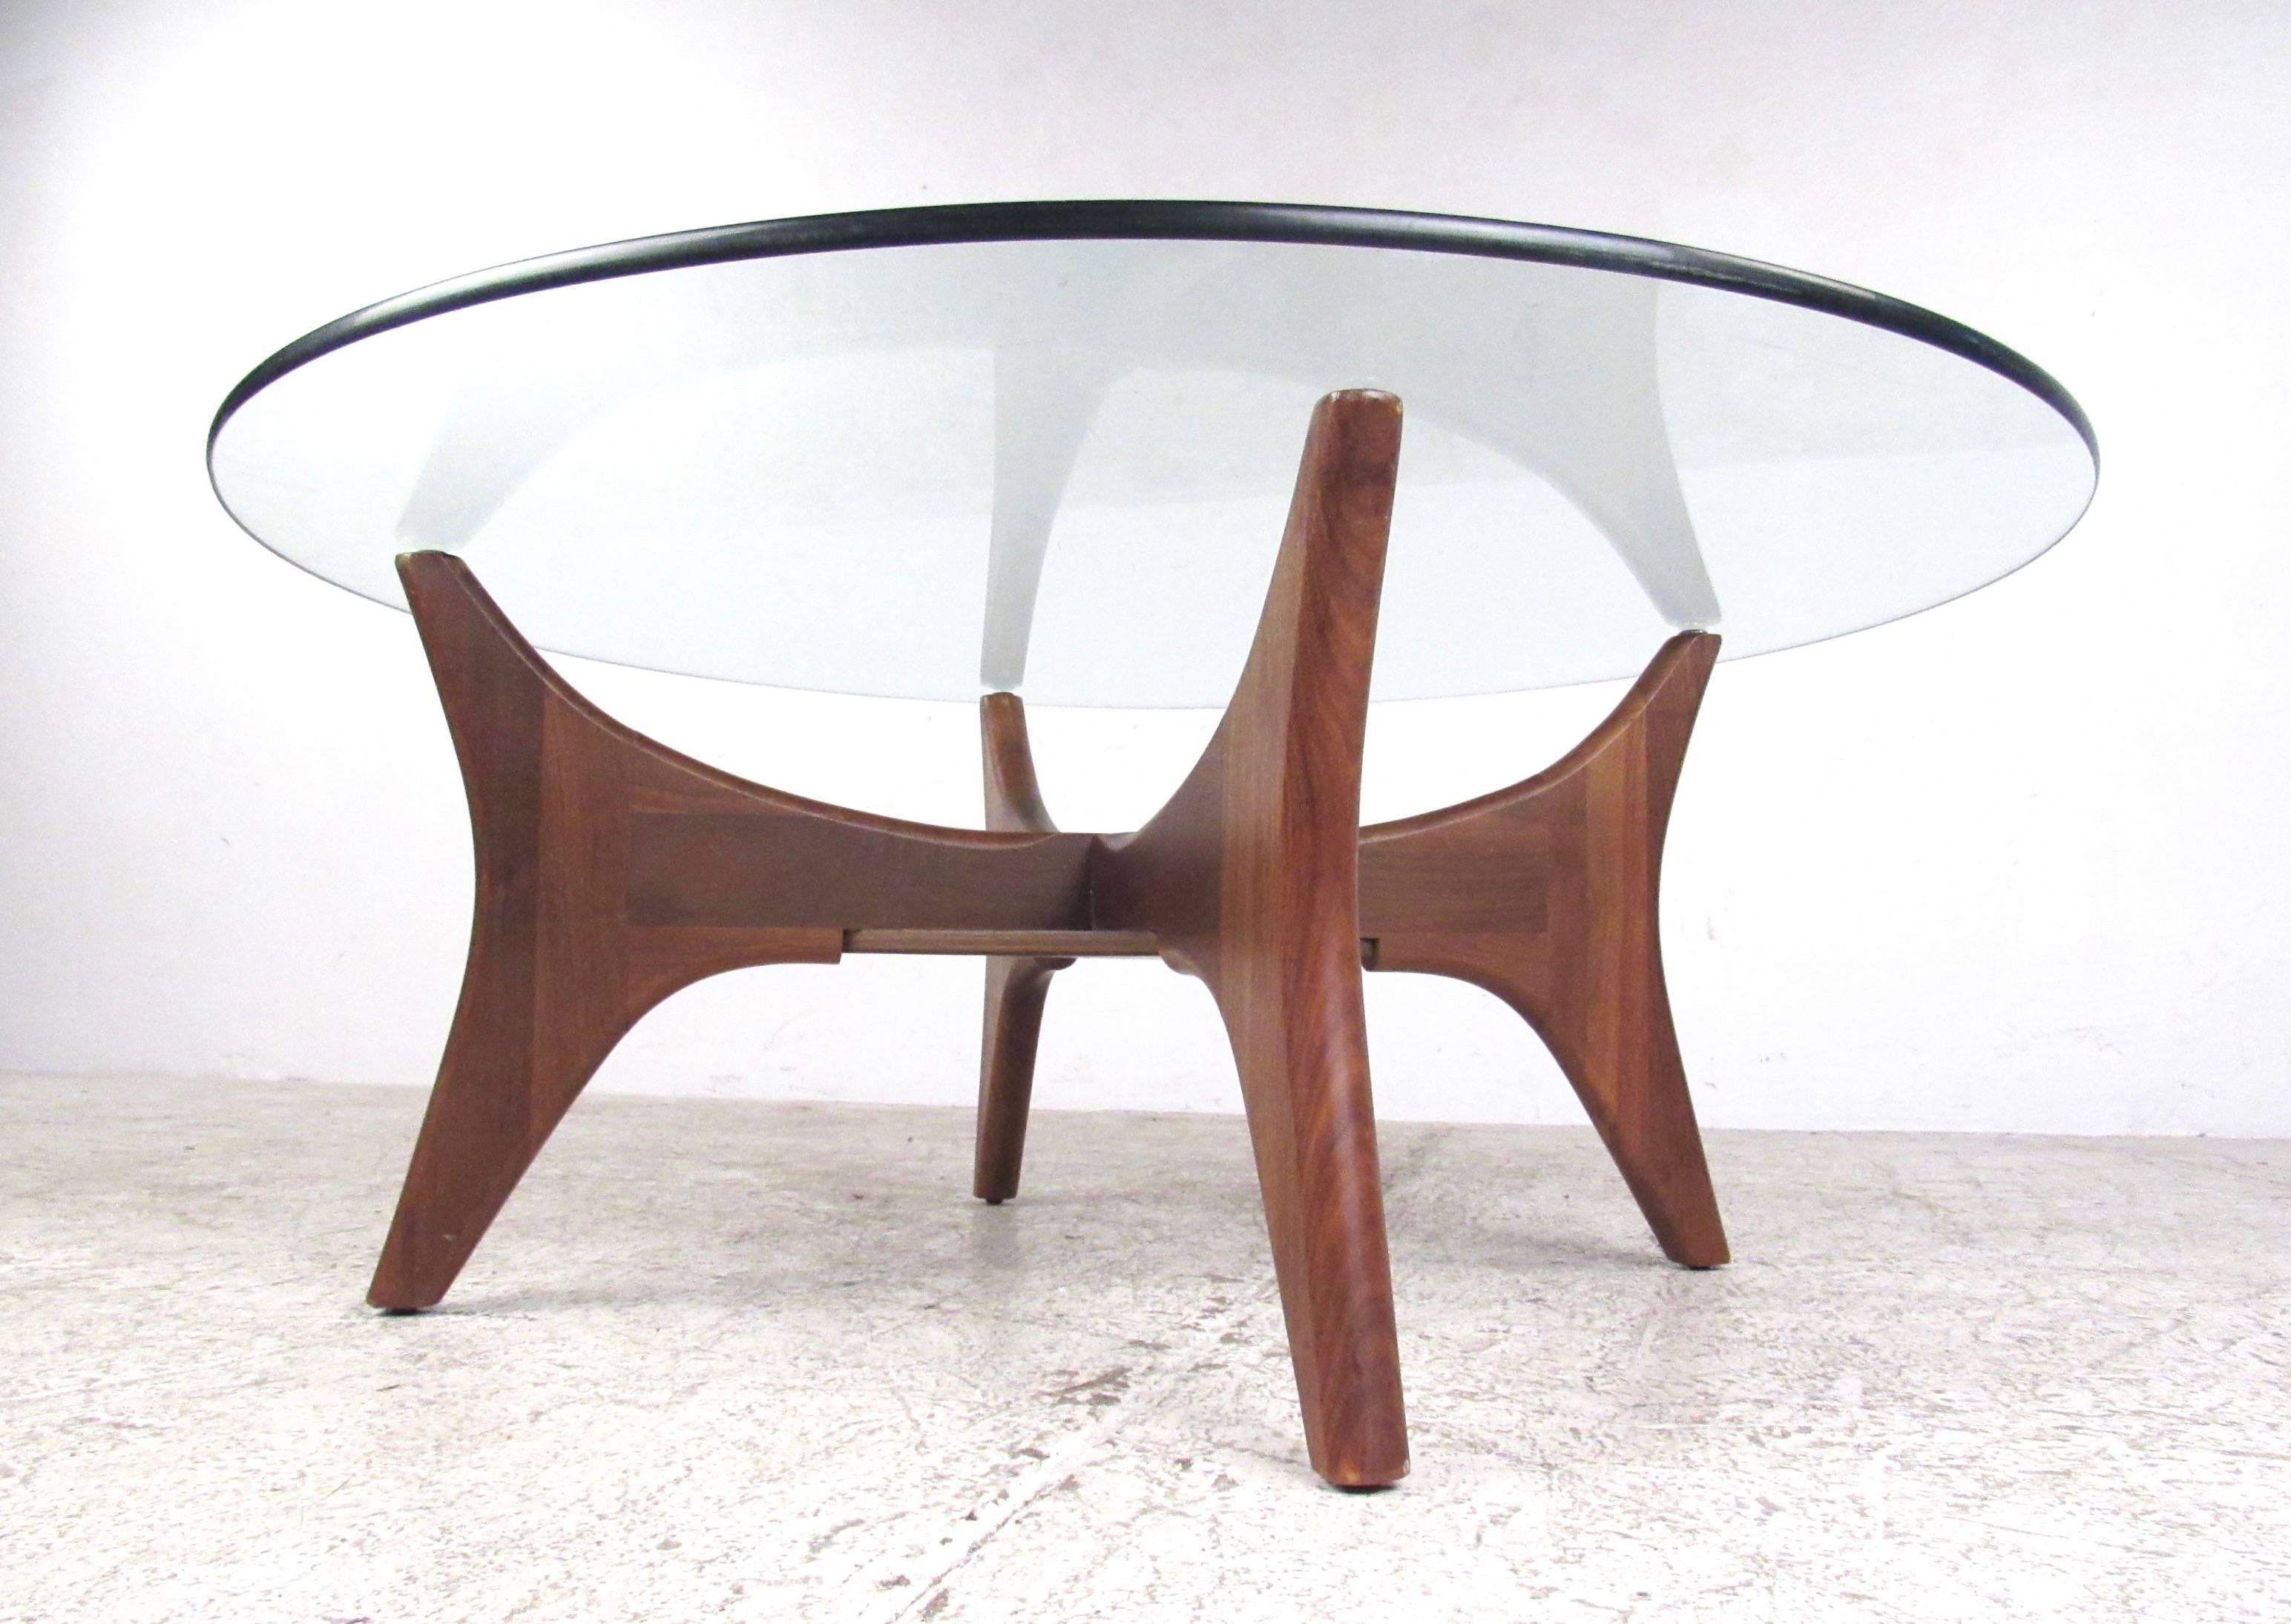 This uniquely designed Mid-Century coffee table makes a beautiful vintage addition to any interior. The Adrian Pearsall style sculpted walnut base is an elegant example of rustic modern design, the unique shape of the table enhanced by it's natural